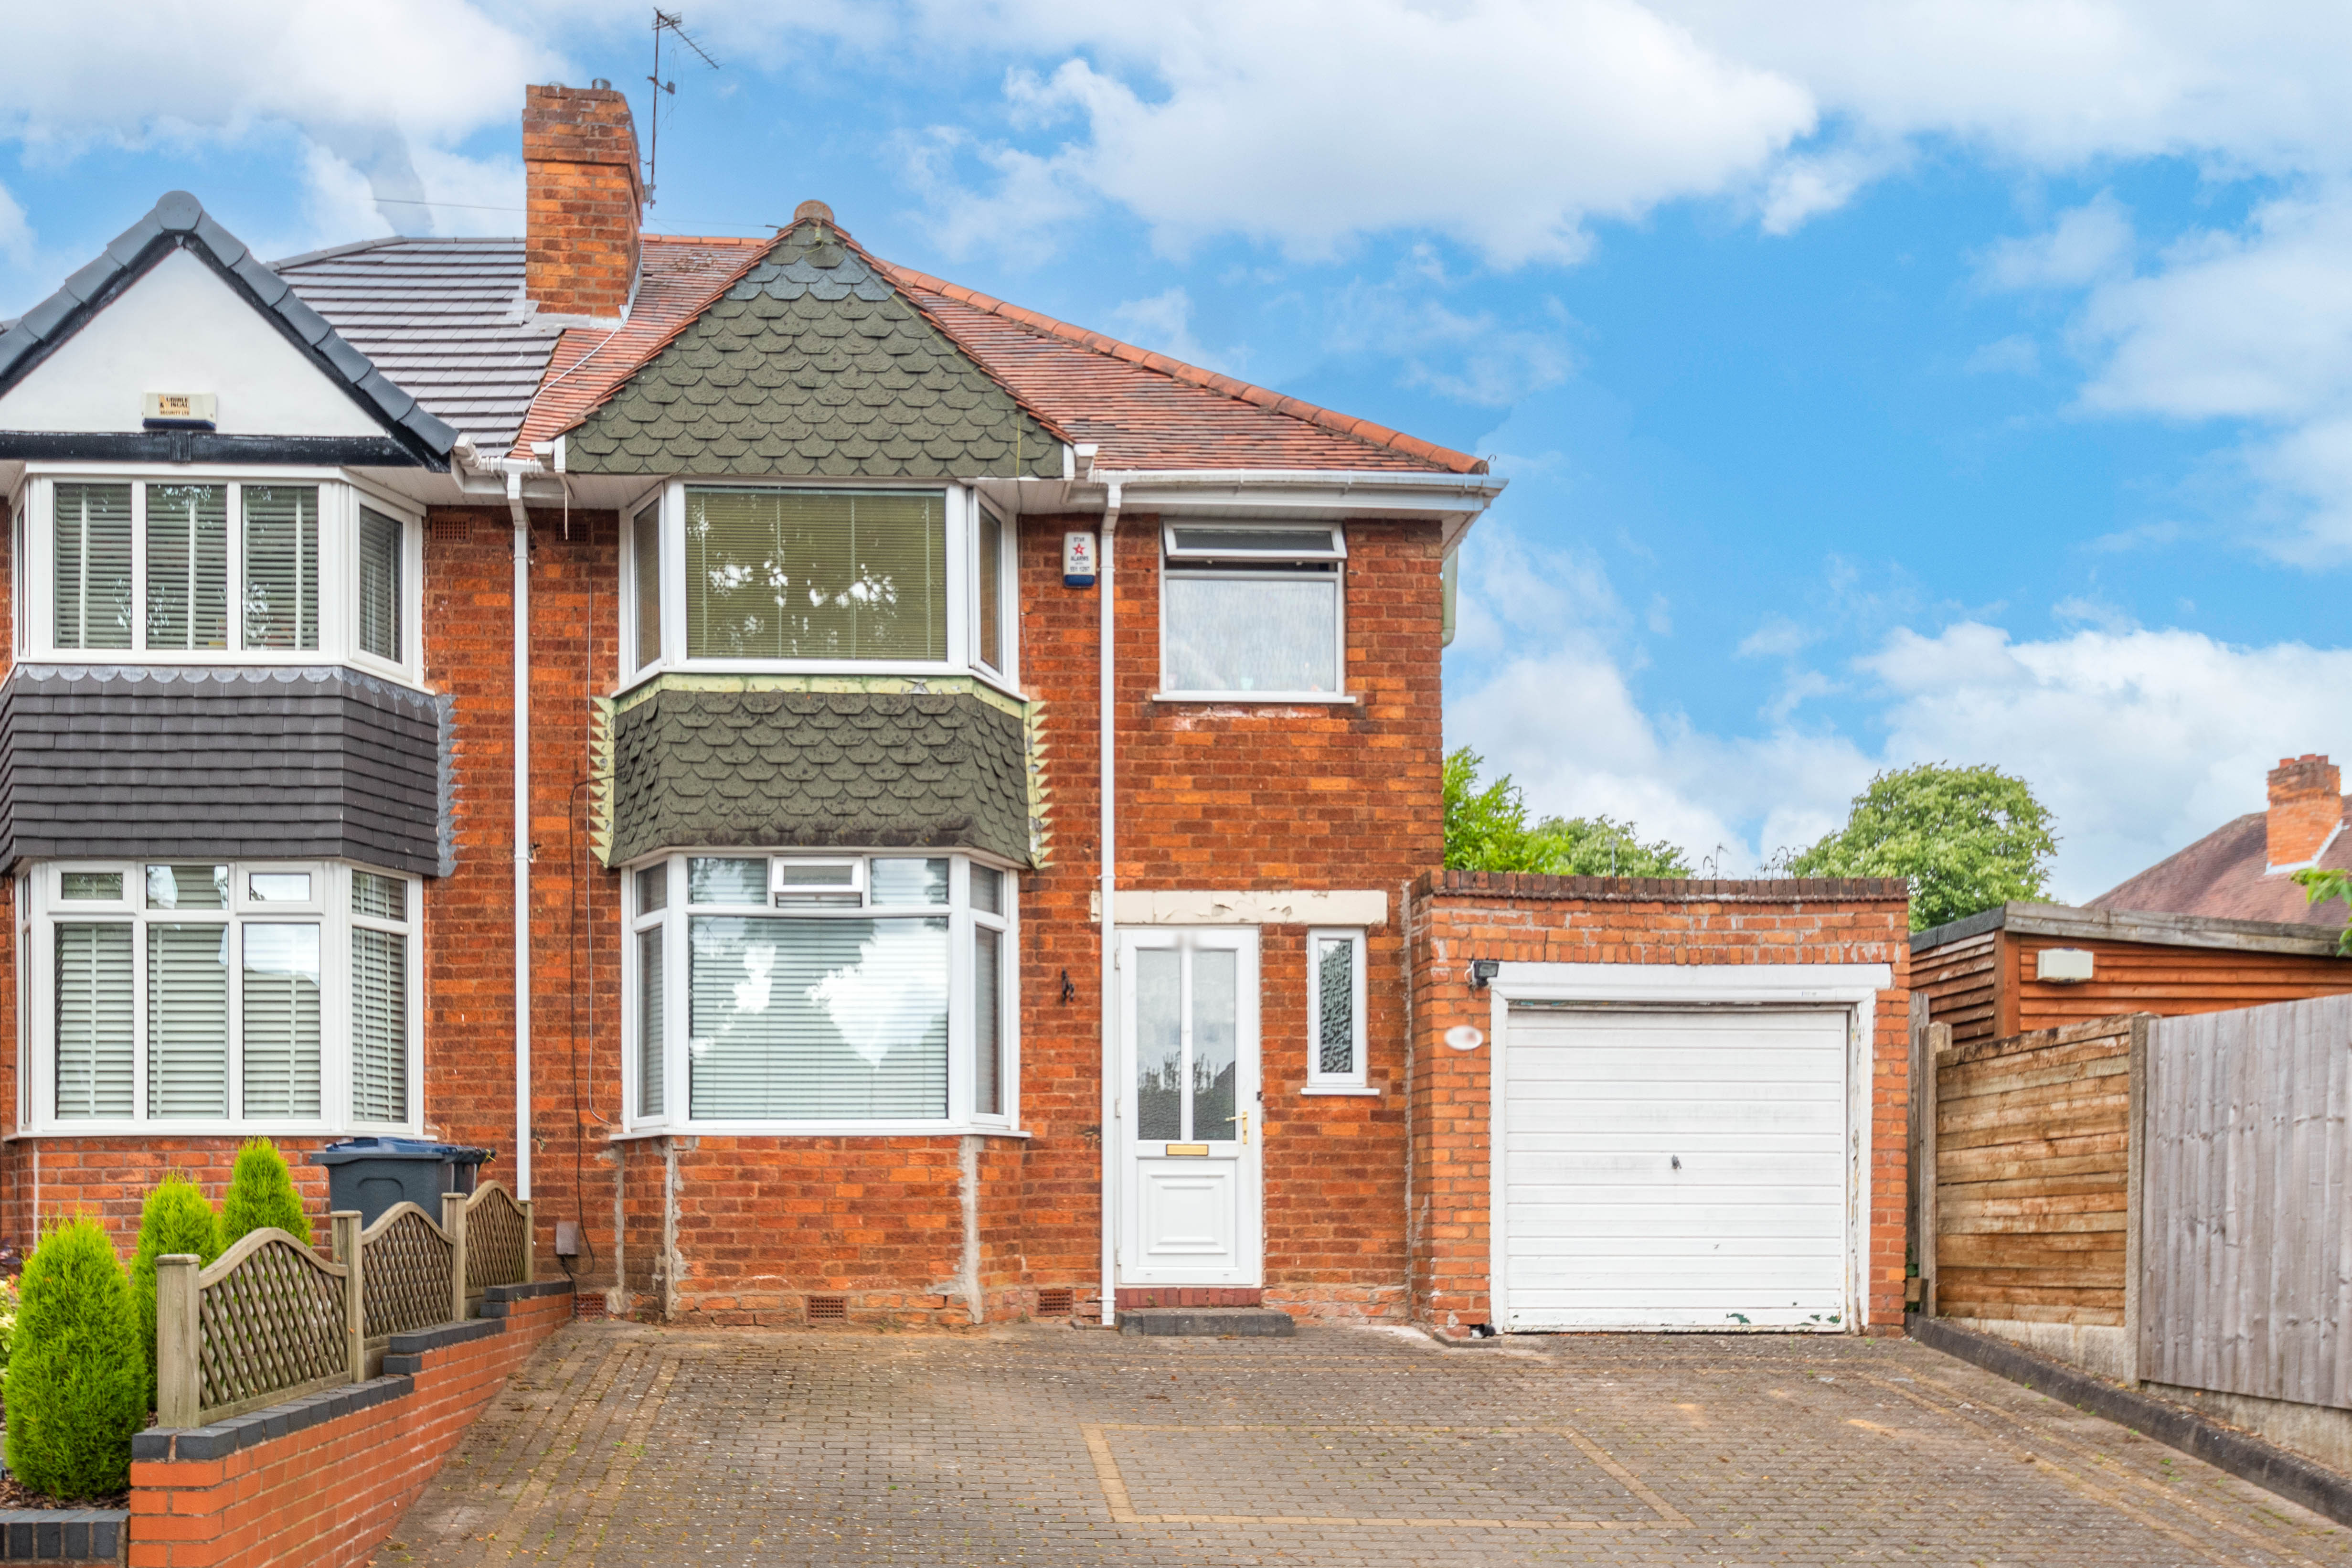 3 bed house for sale in Wilmington Road, Quinton - Property Image 1